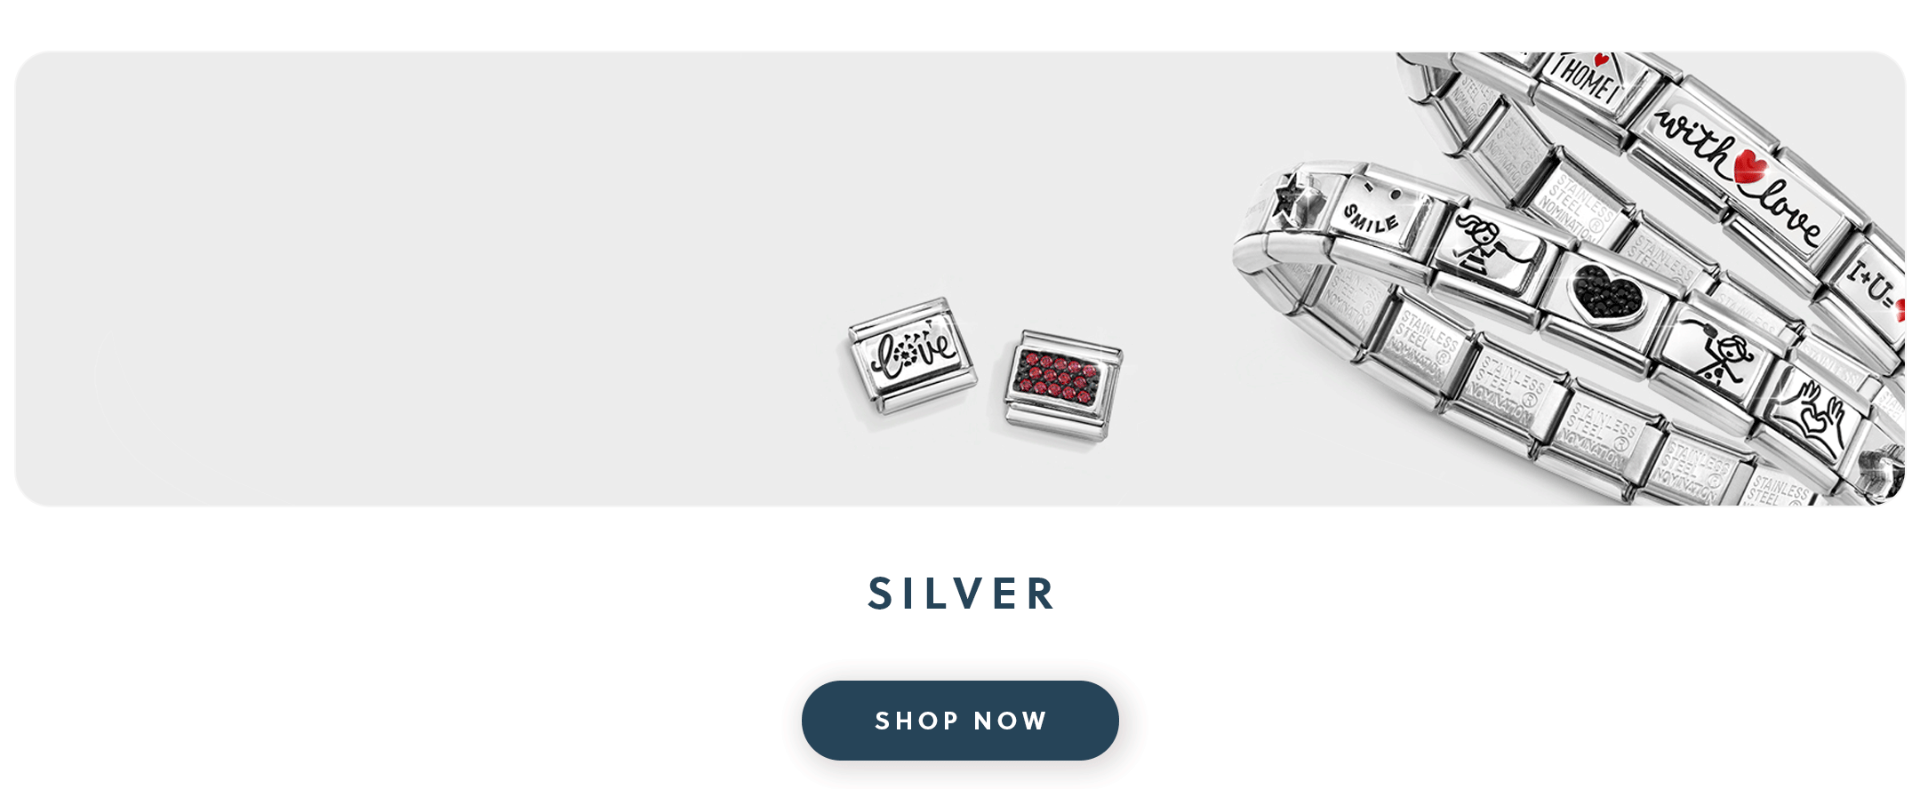 A silver Nomination bracelet with text silver shop now